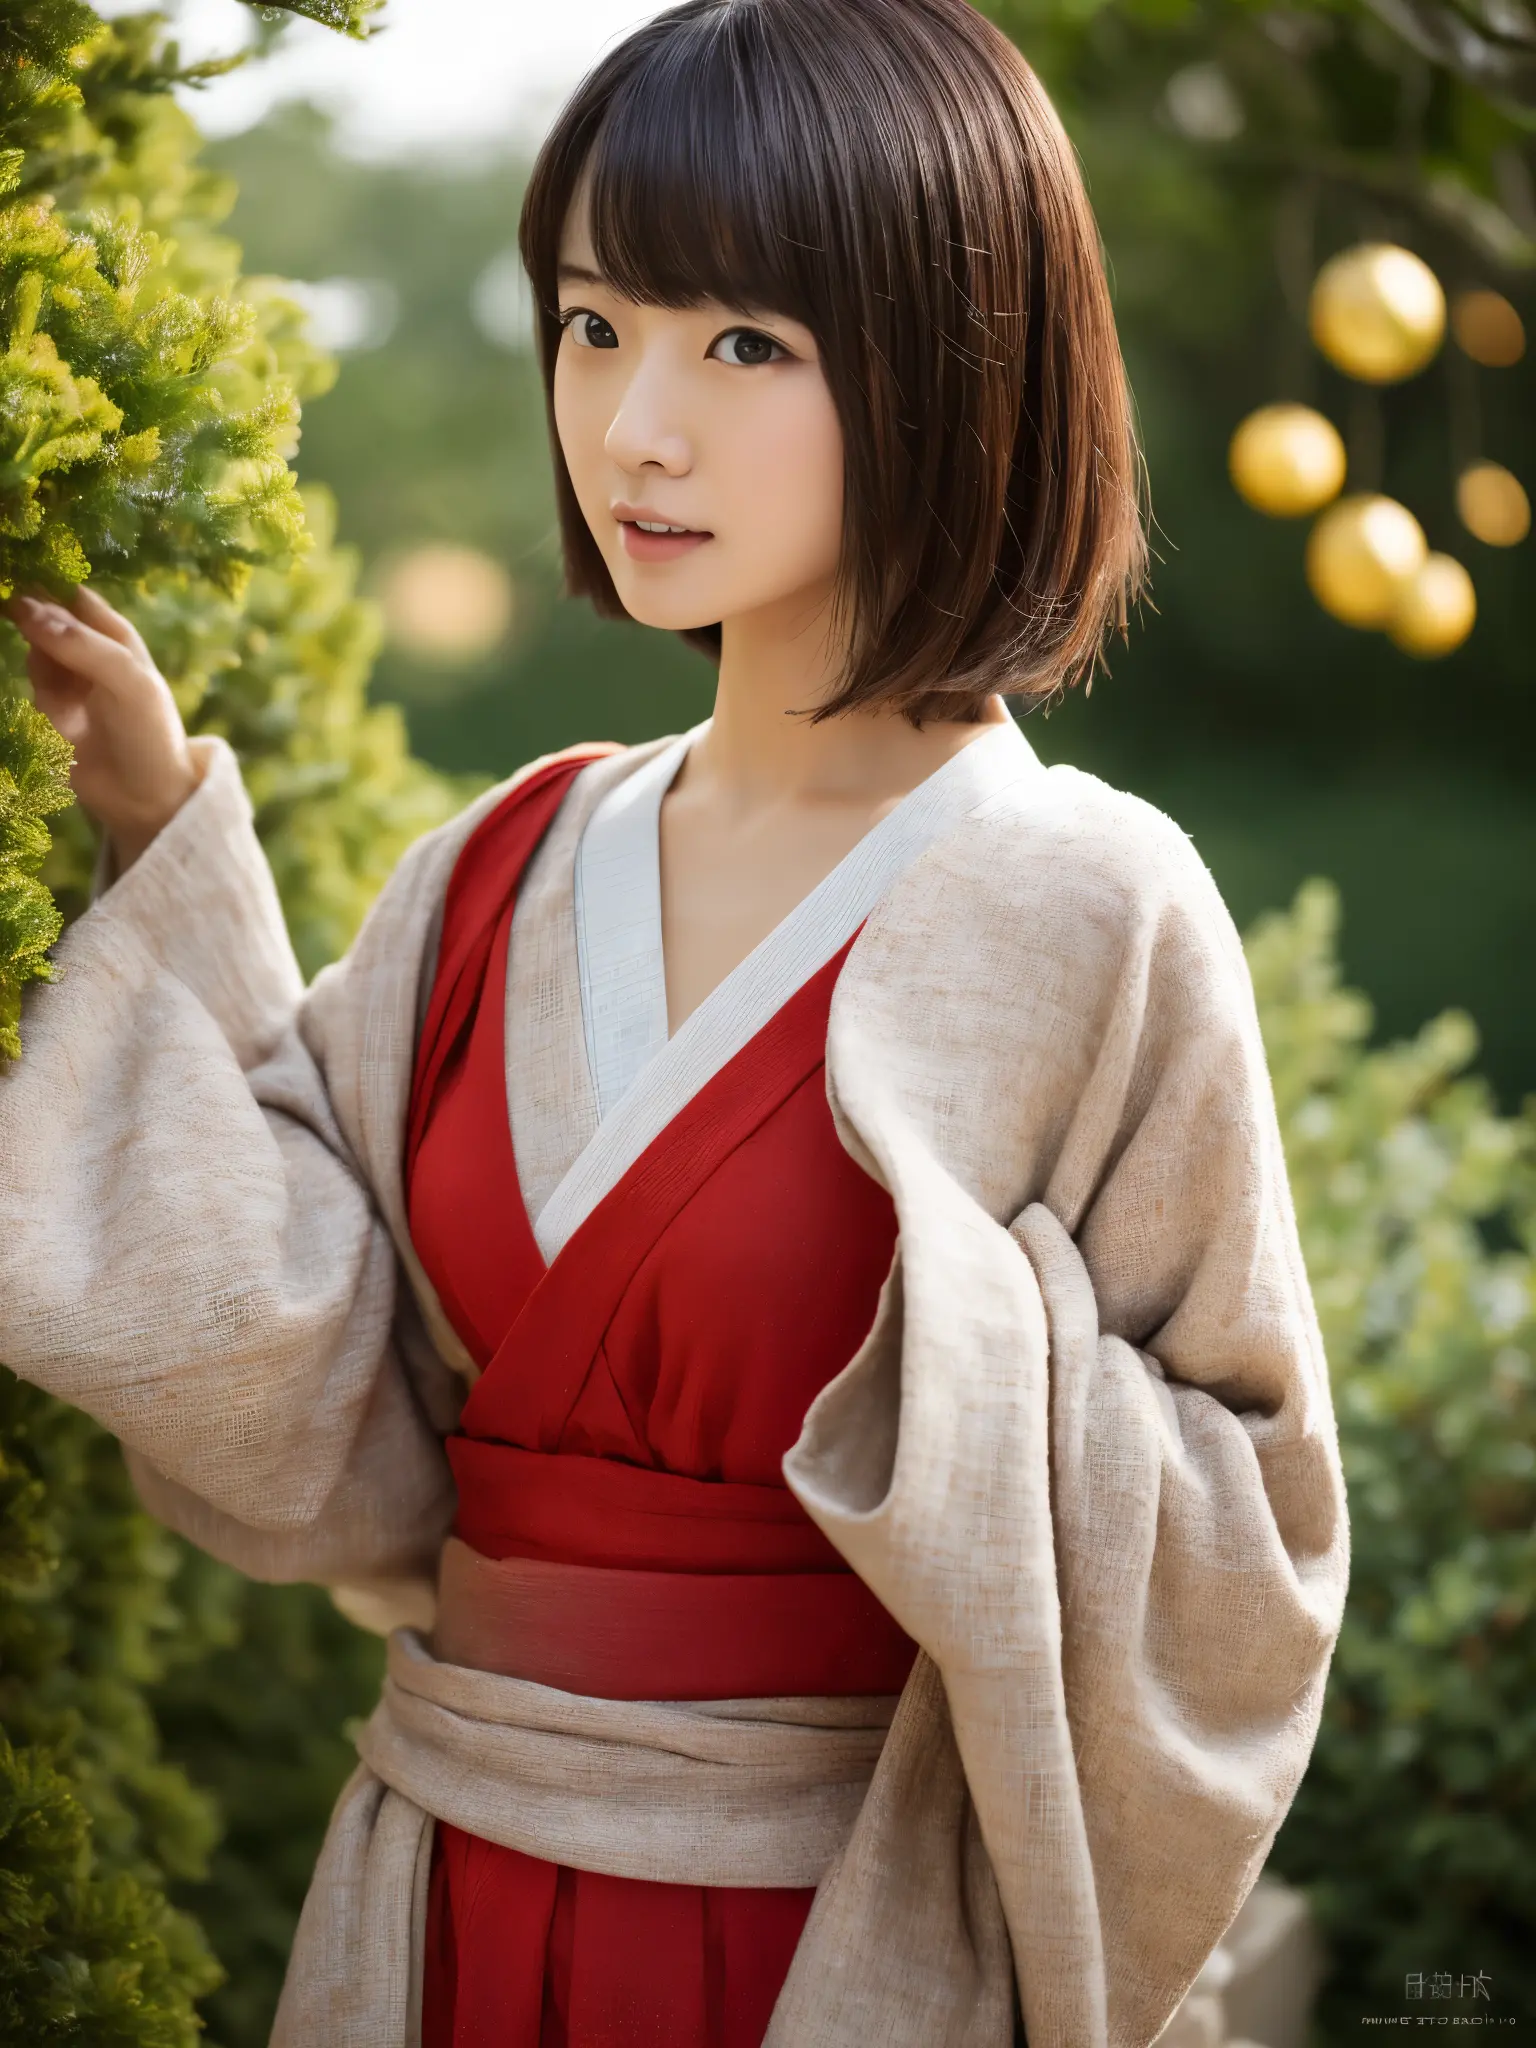 30 years old Japanese woman, Light color skin, Expressionless, Short curly hair, Wearing red Kimono with yellow ornaments, Dress...